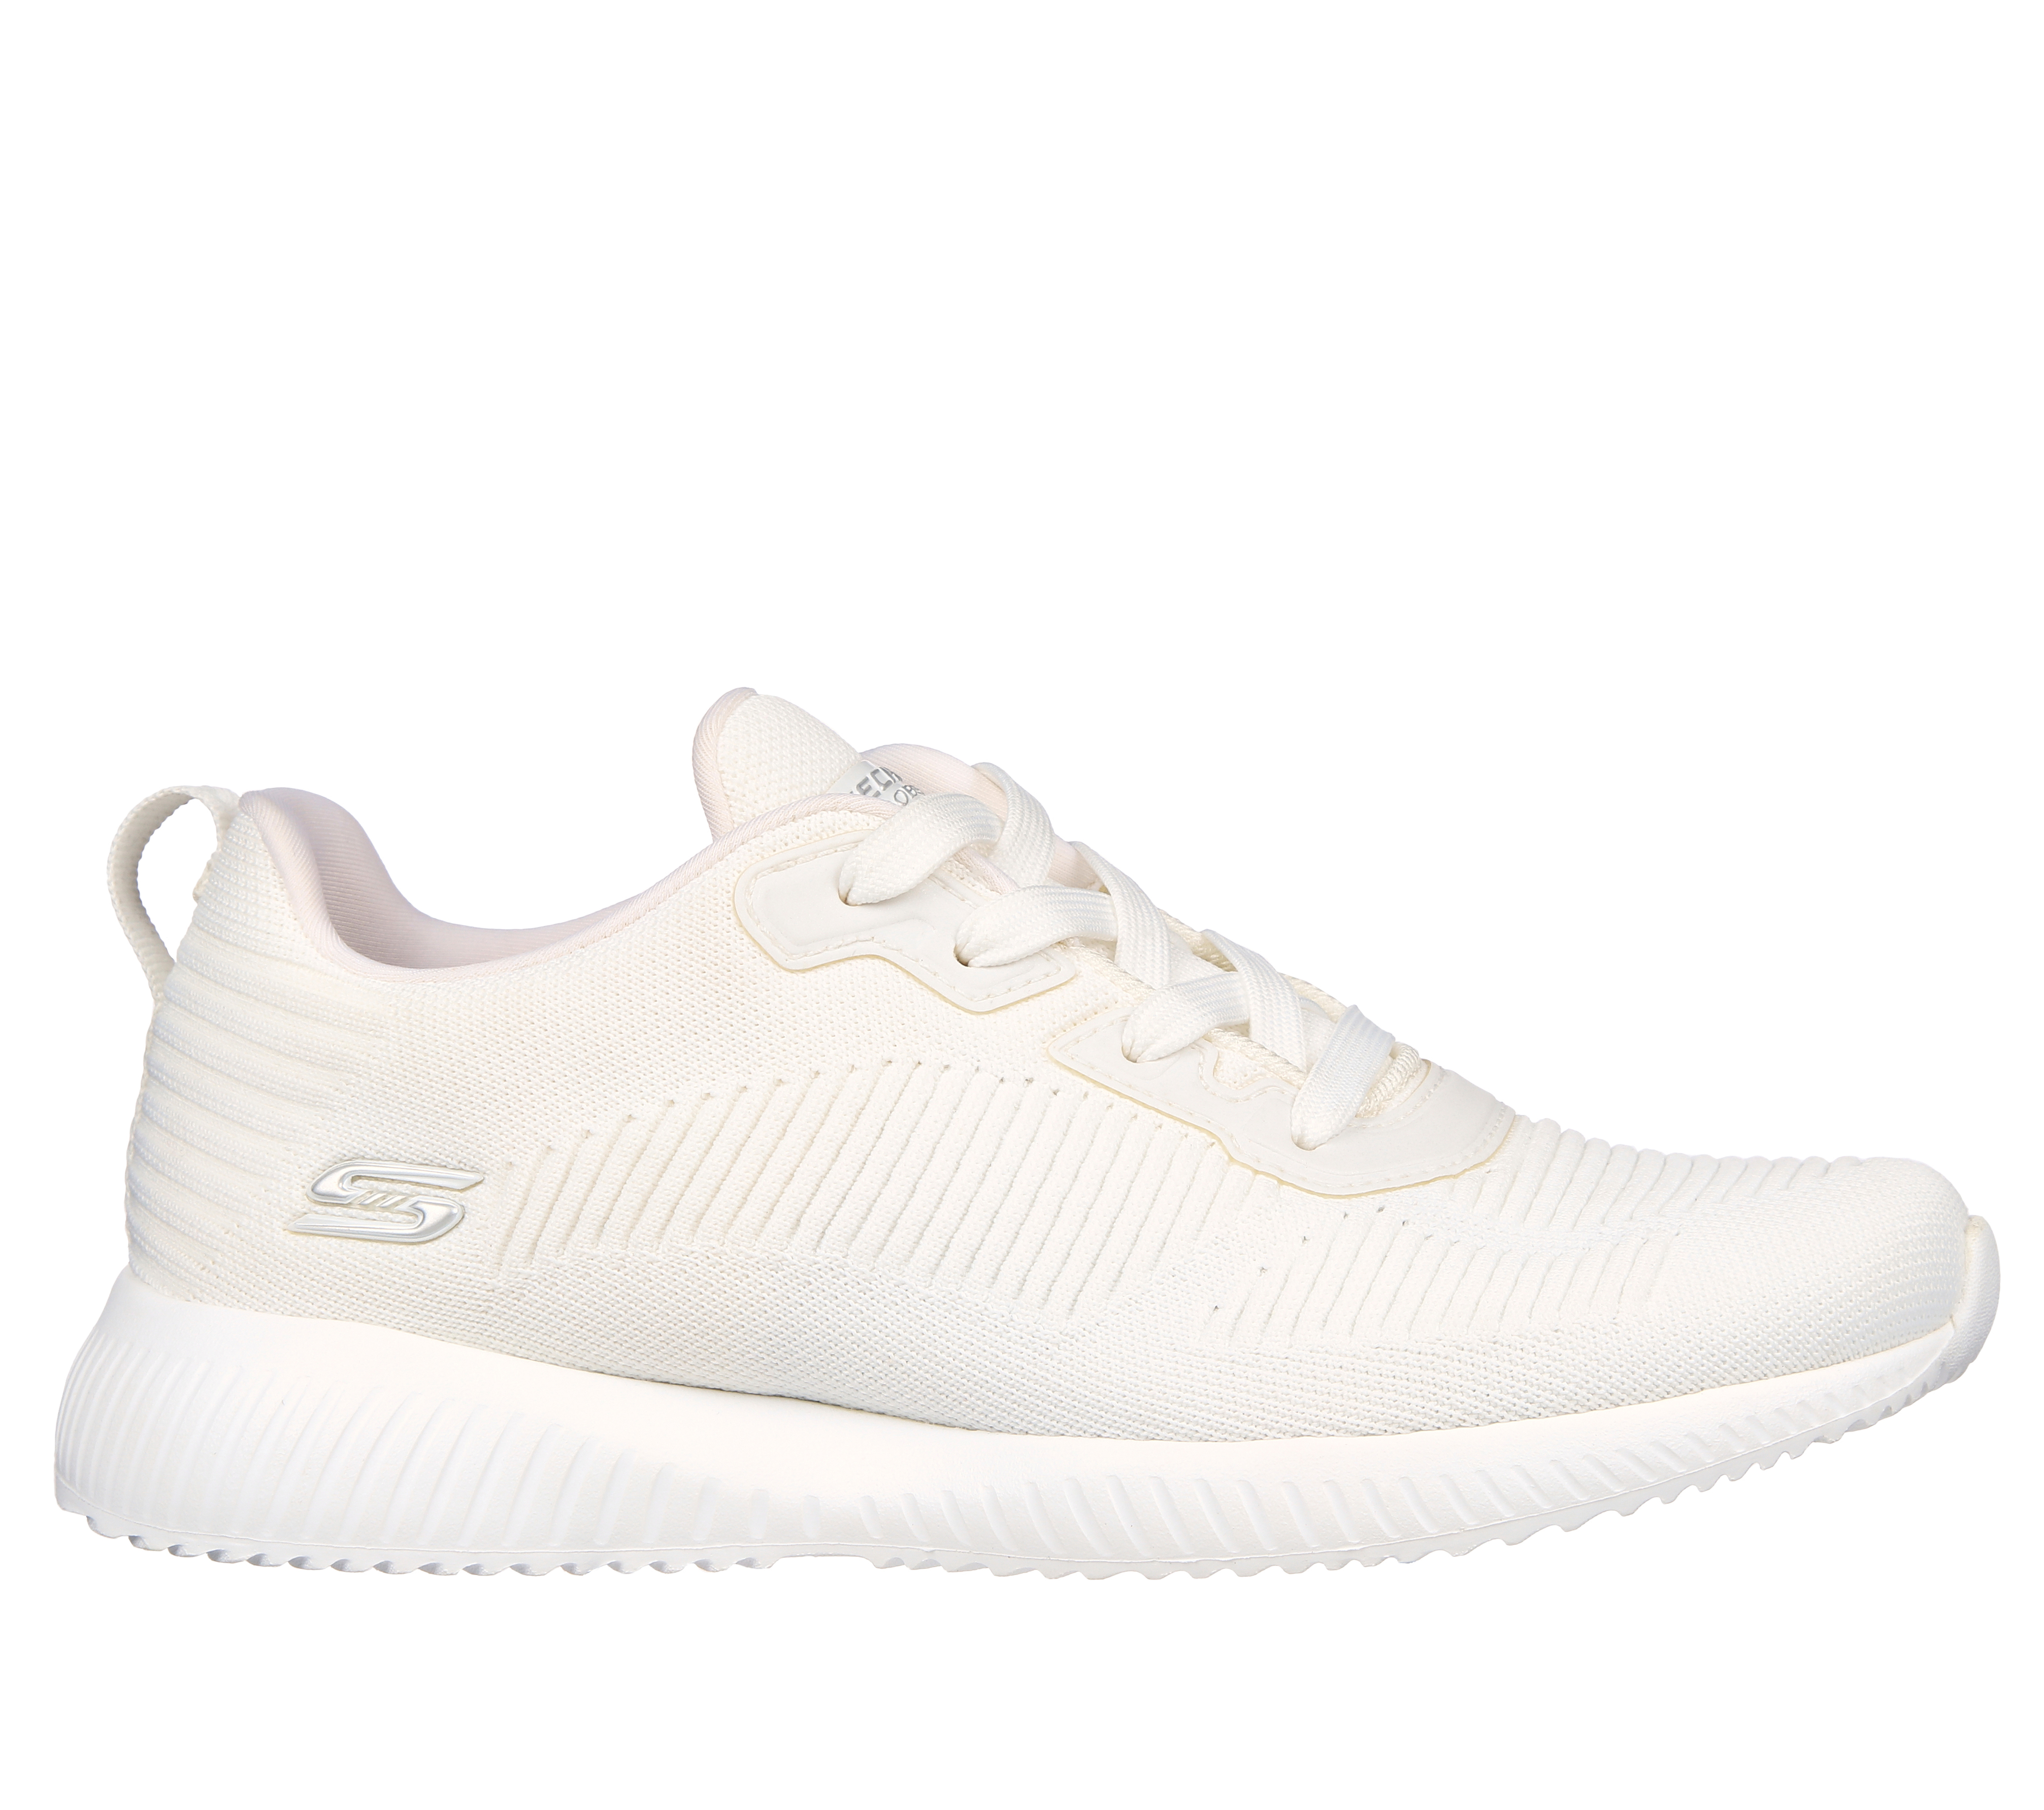 skechers bobs white shoes